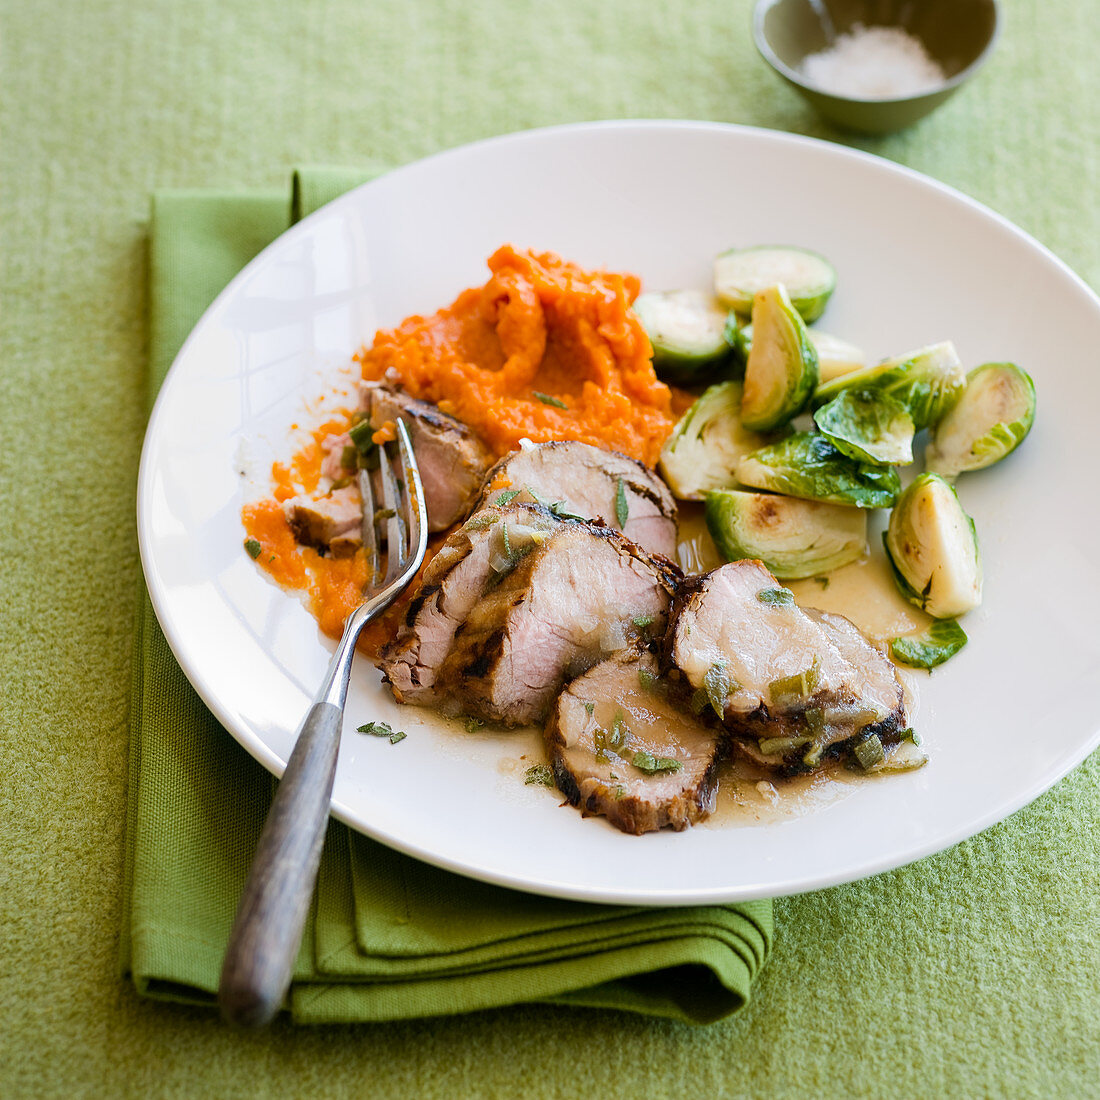 Grilled Pork Tenderloin with Apple Sage Sauce and brussel sprouts